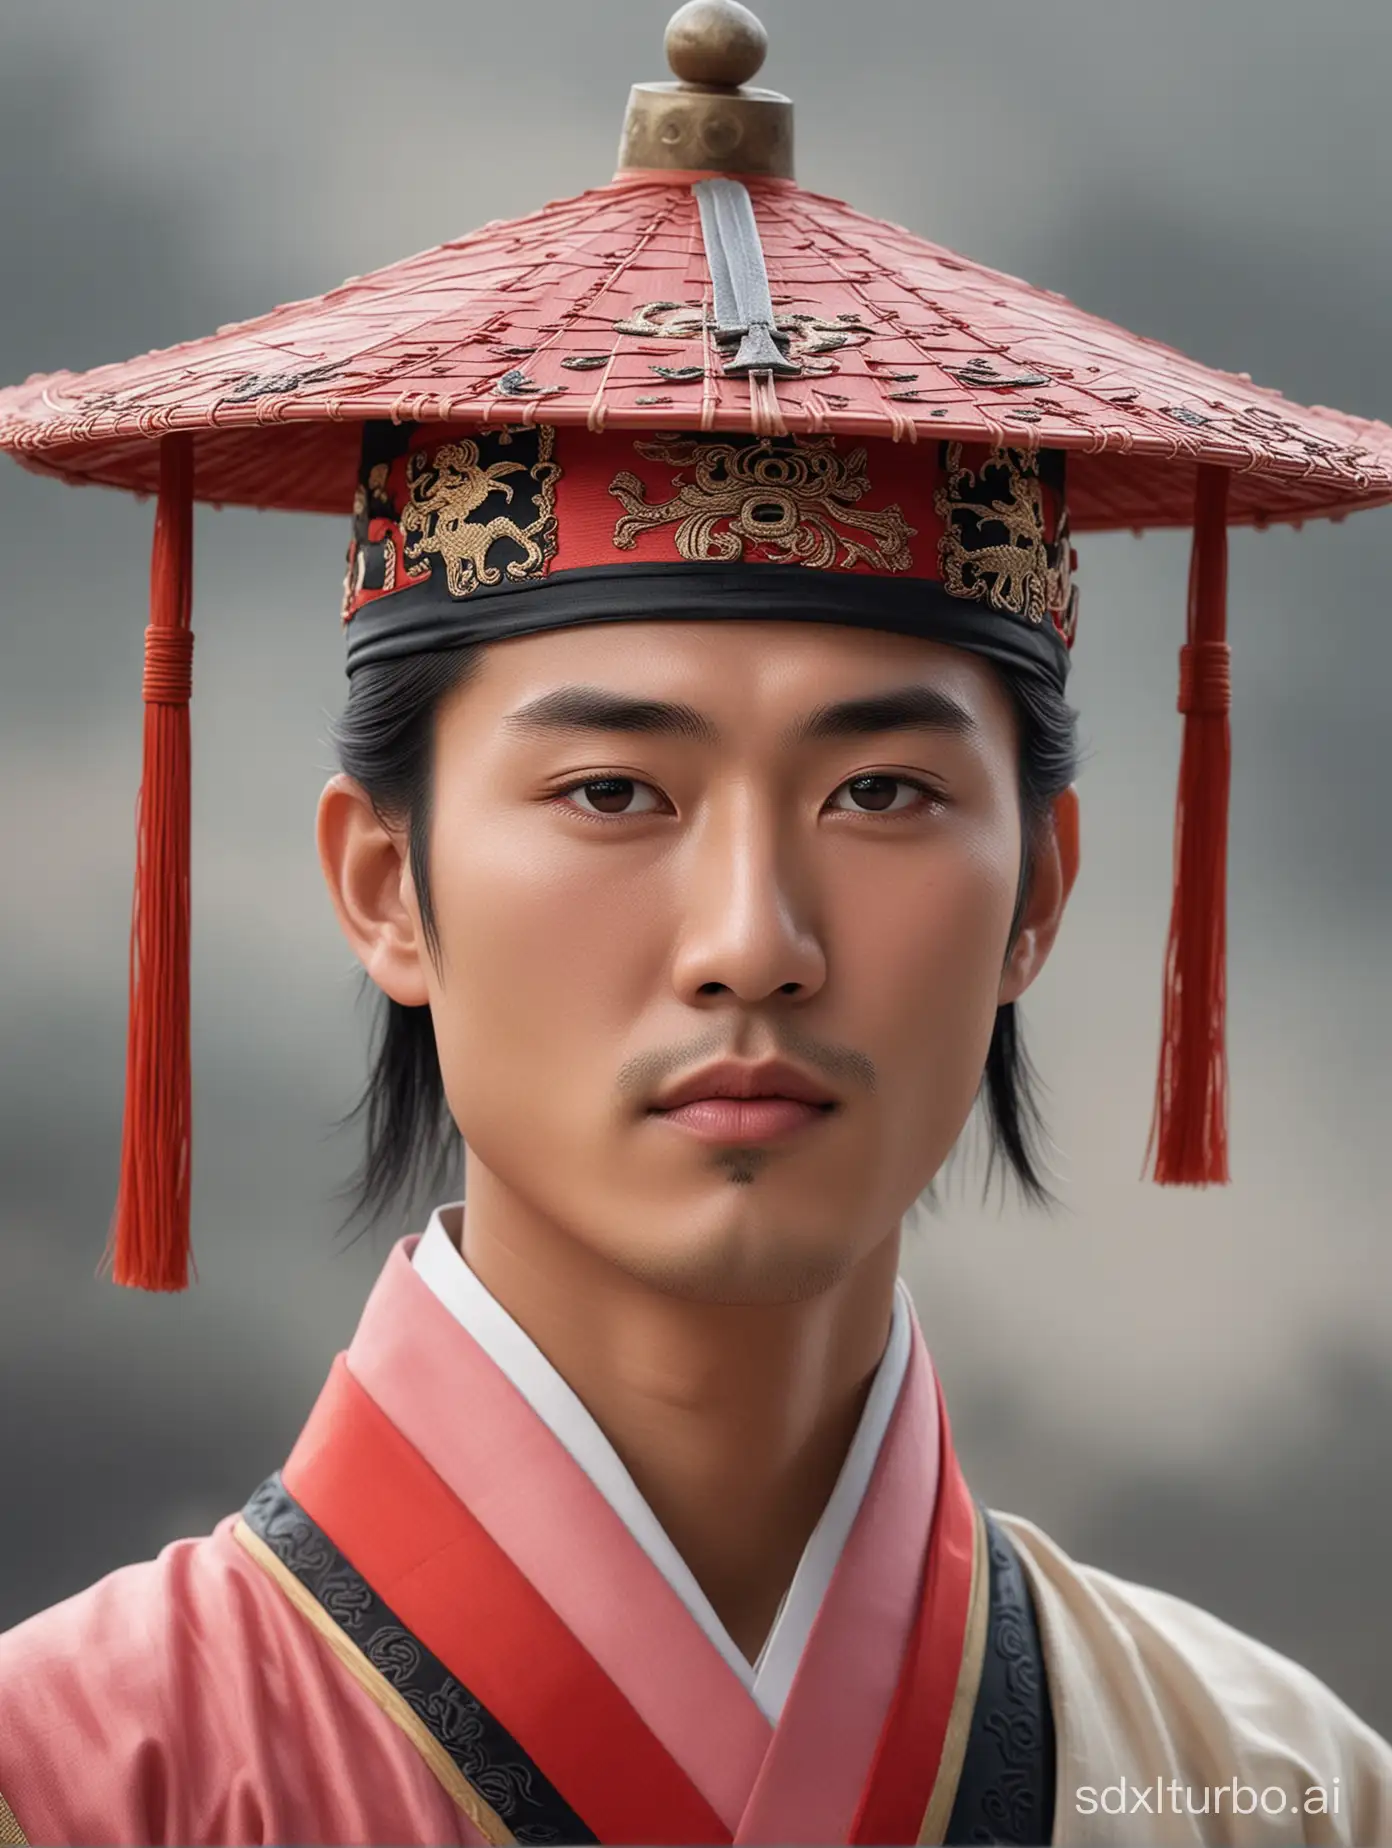 The young emperor of the Han Dynasty, Huan Rushun, is depicted in red and white with black hair, wearing an ancient Chinese official hat on his head. He looks straight ahead at the camera in a closeup shot with a blurred background and a light pink color scheme highlighting high definition details. The style of the image is reminiscent of traditional Chinese movie stills set against a gray sky